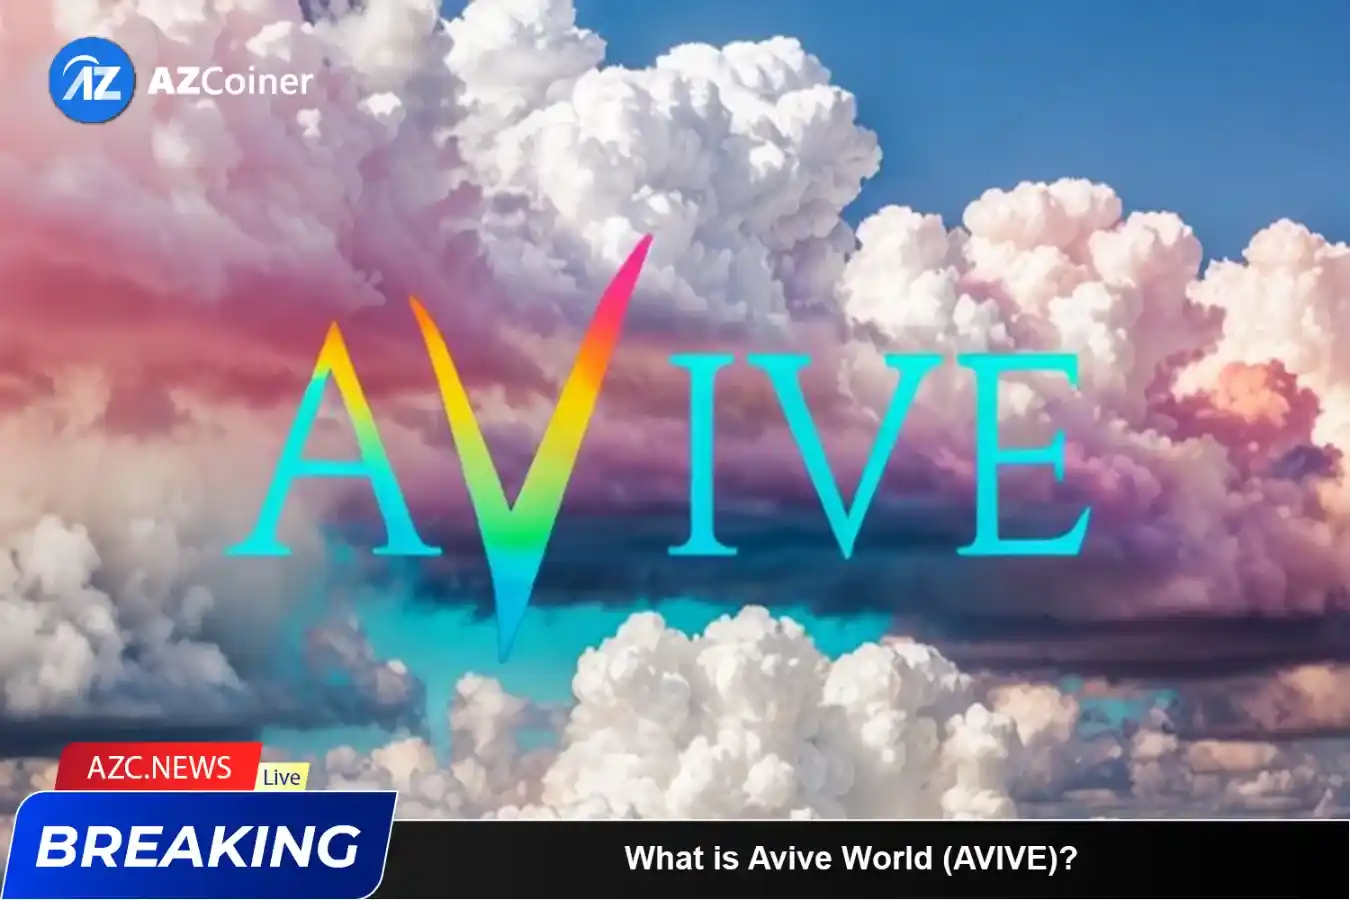 What Is Avive World? Let’s Learn About The Avive Token_65b97347cafff.webp